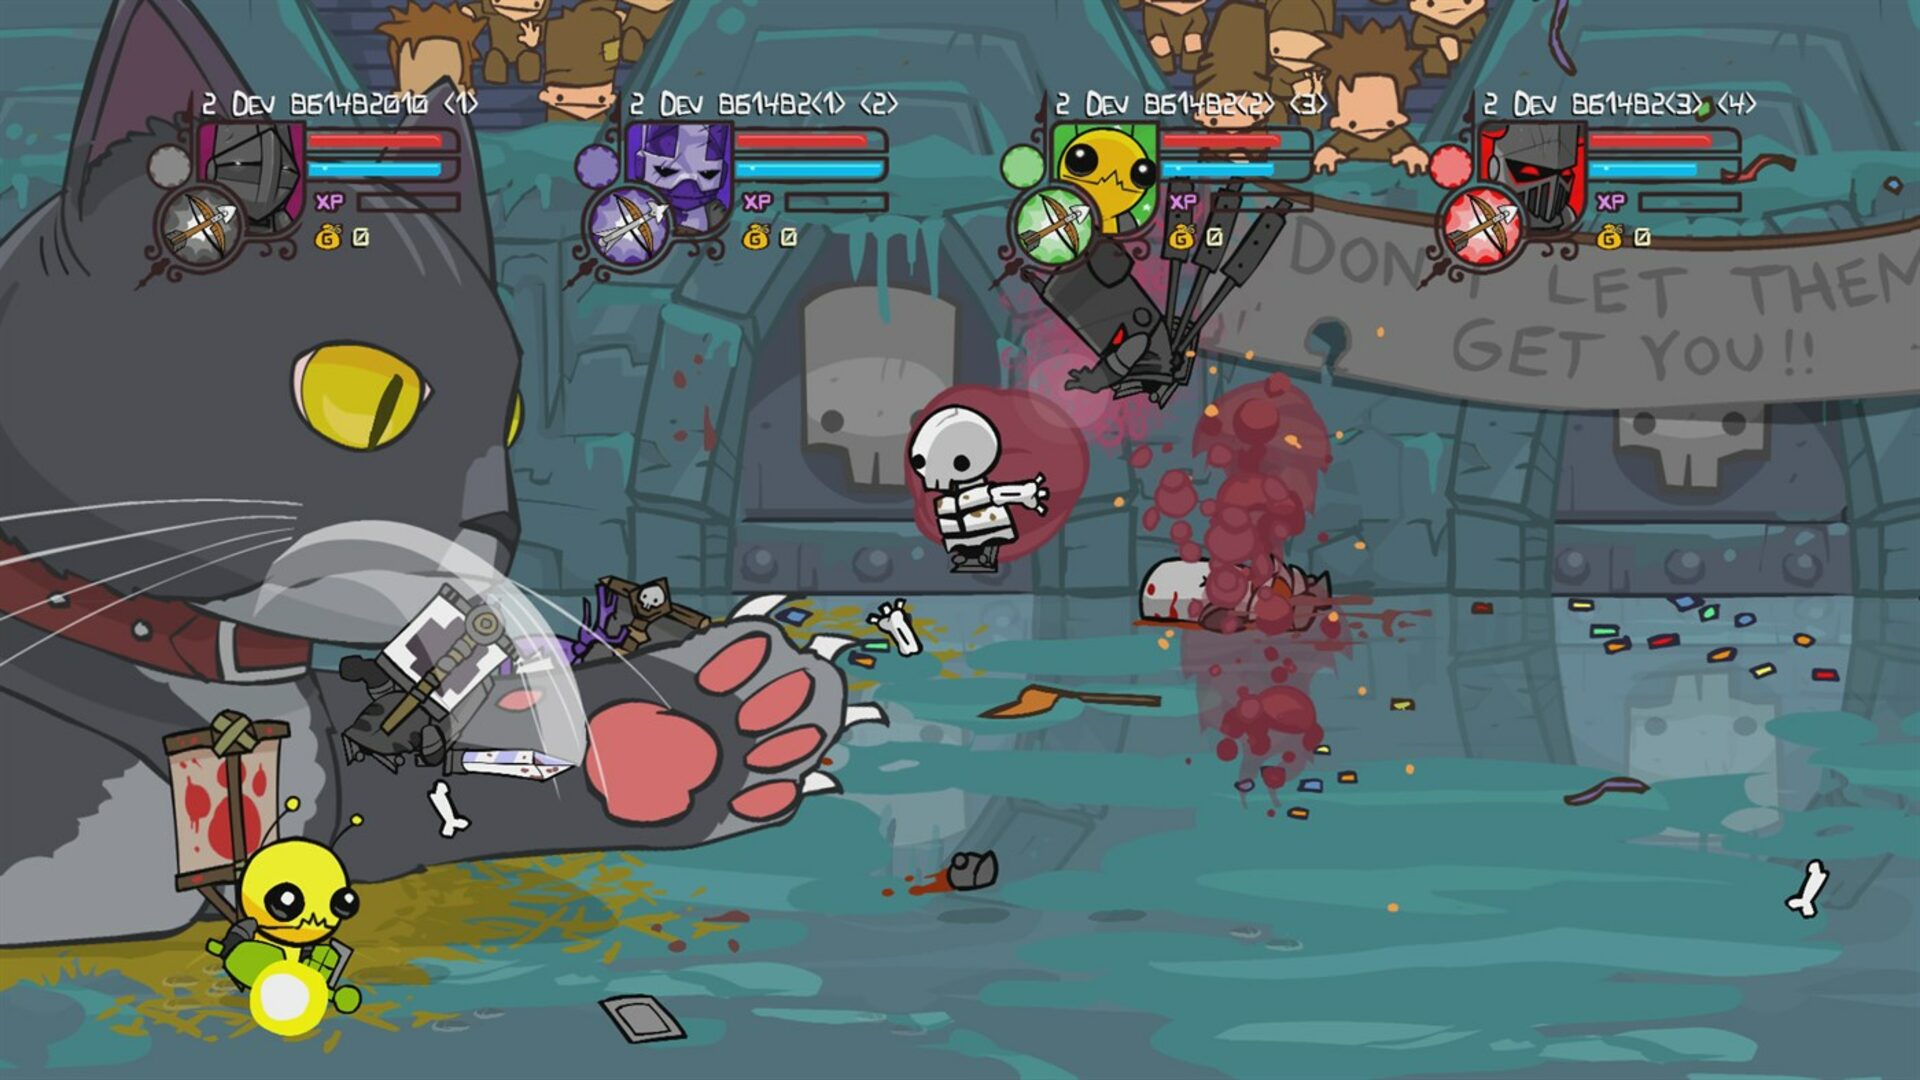 Castle Crashers Remastered hits Xbox One Sept. 9 - Polygon